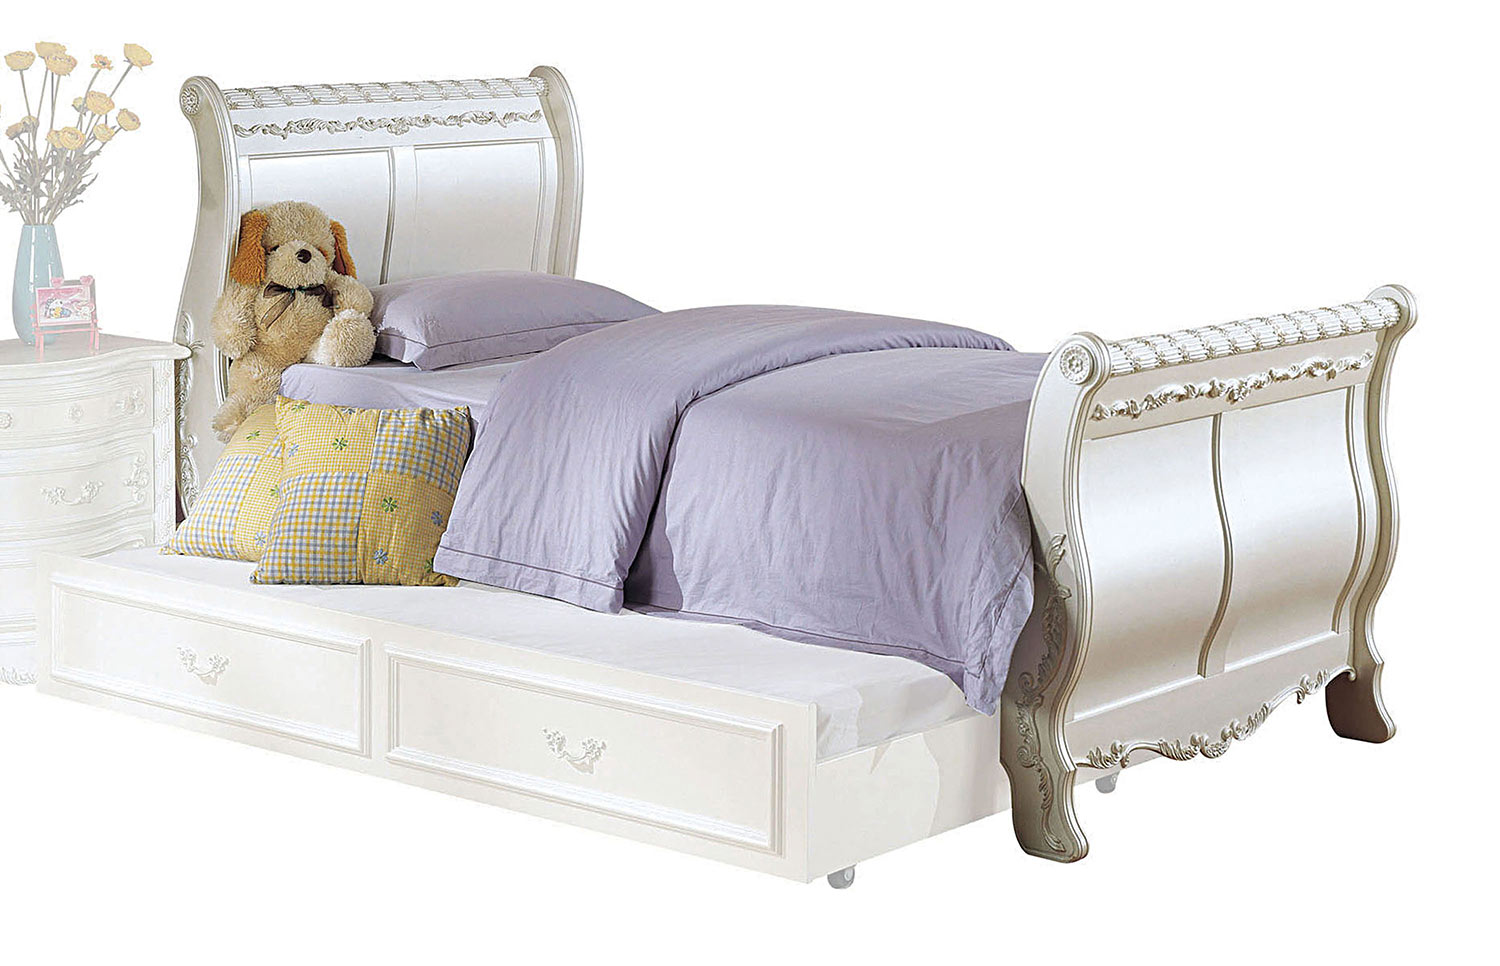 Acme Pearl Bed (Sleigh) - Pearl White/Gold Brush Accent